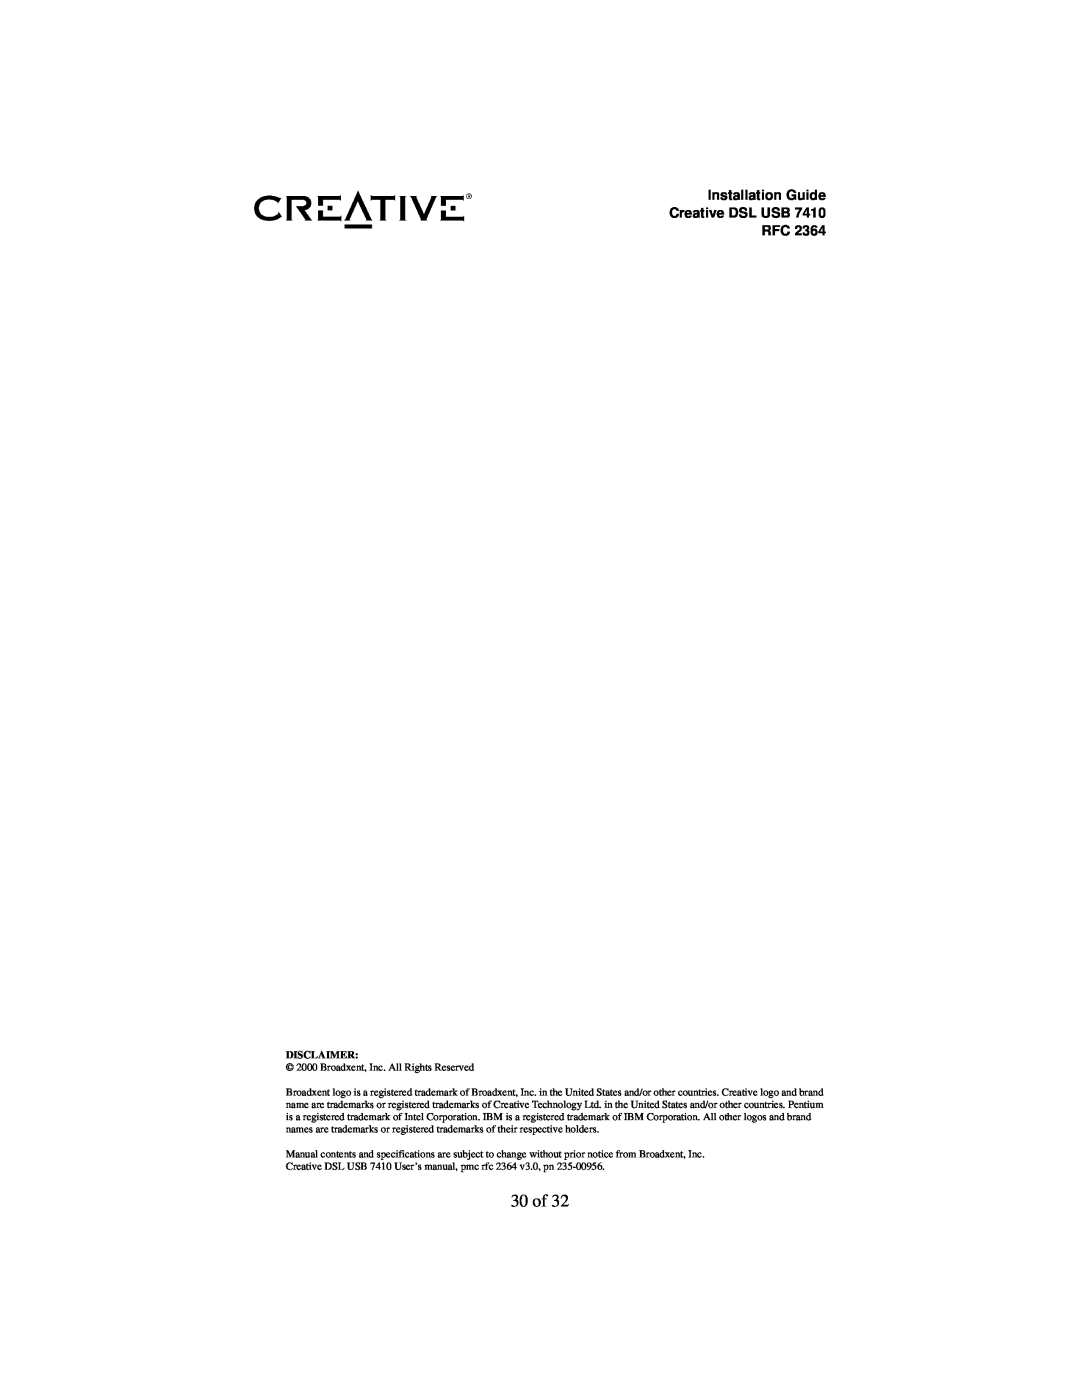 Creative RFC 2364 appendix 30 of, Installation Guide Creative DSL USB RFC, Disclaimer, Broadxent, Inc. All Rights Reserved 